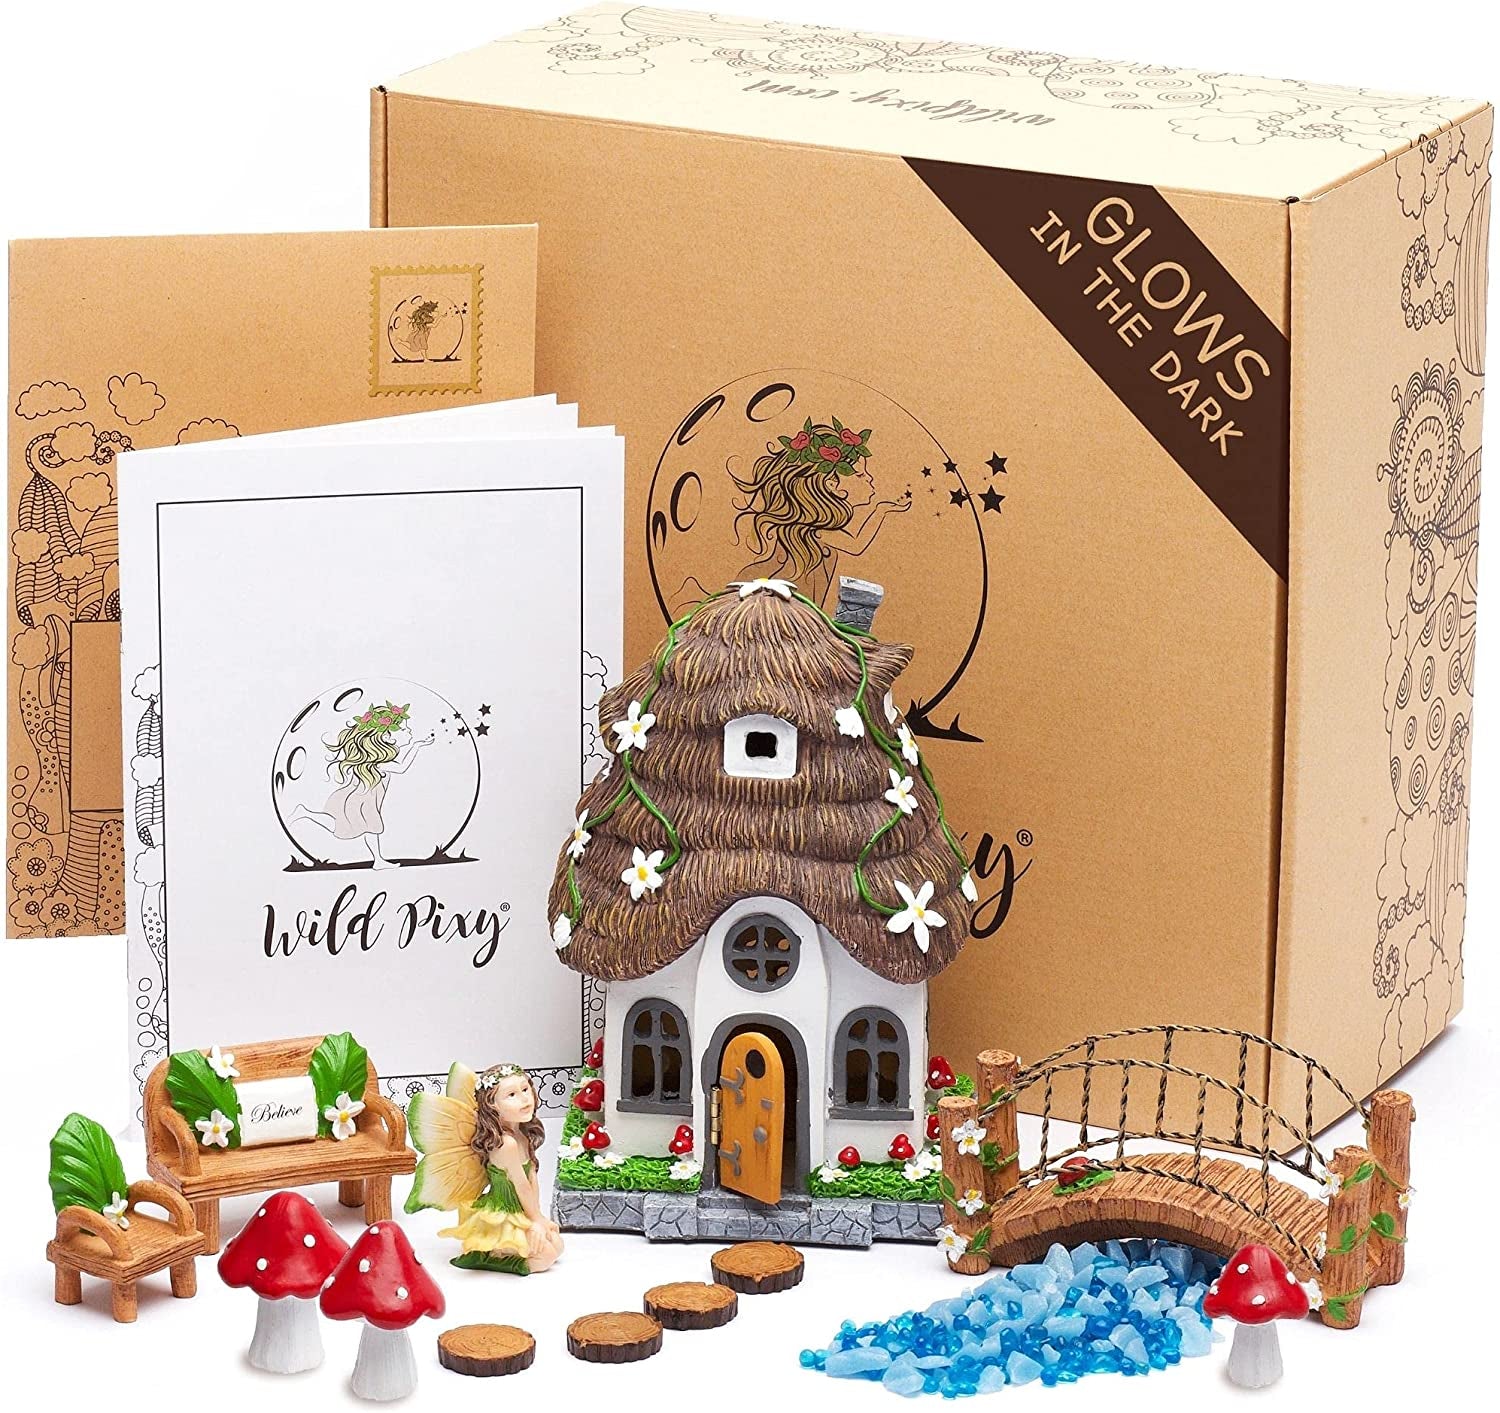 Wild Pixy, Fairy Garden Accessories Kit - Miniature House and Figurine Set for Girls, Boys, Adults - with Magical Glow in the Dark Pebbles and Solar LED Lights